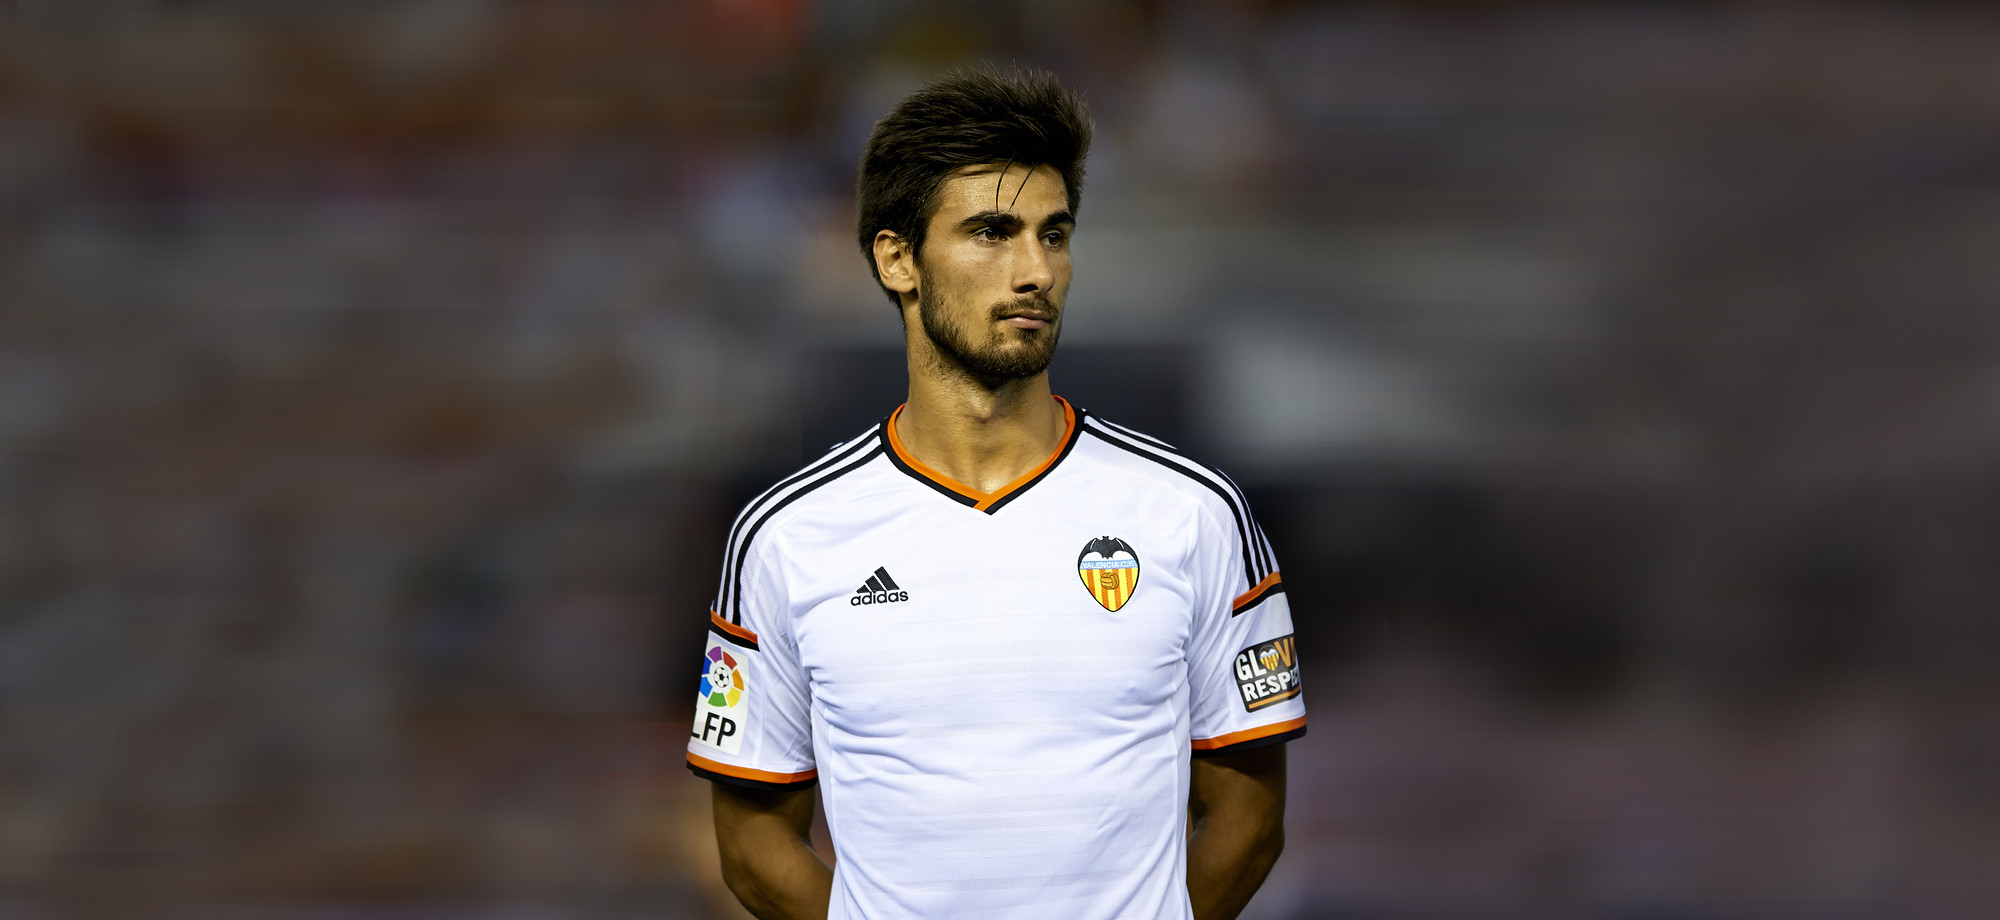 andre_gomes